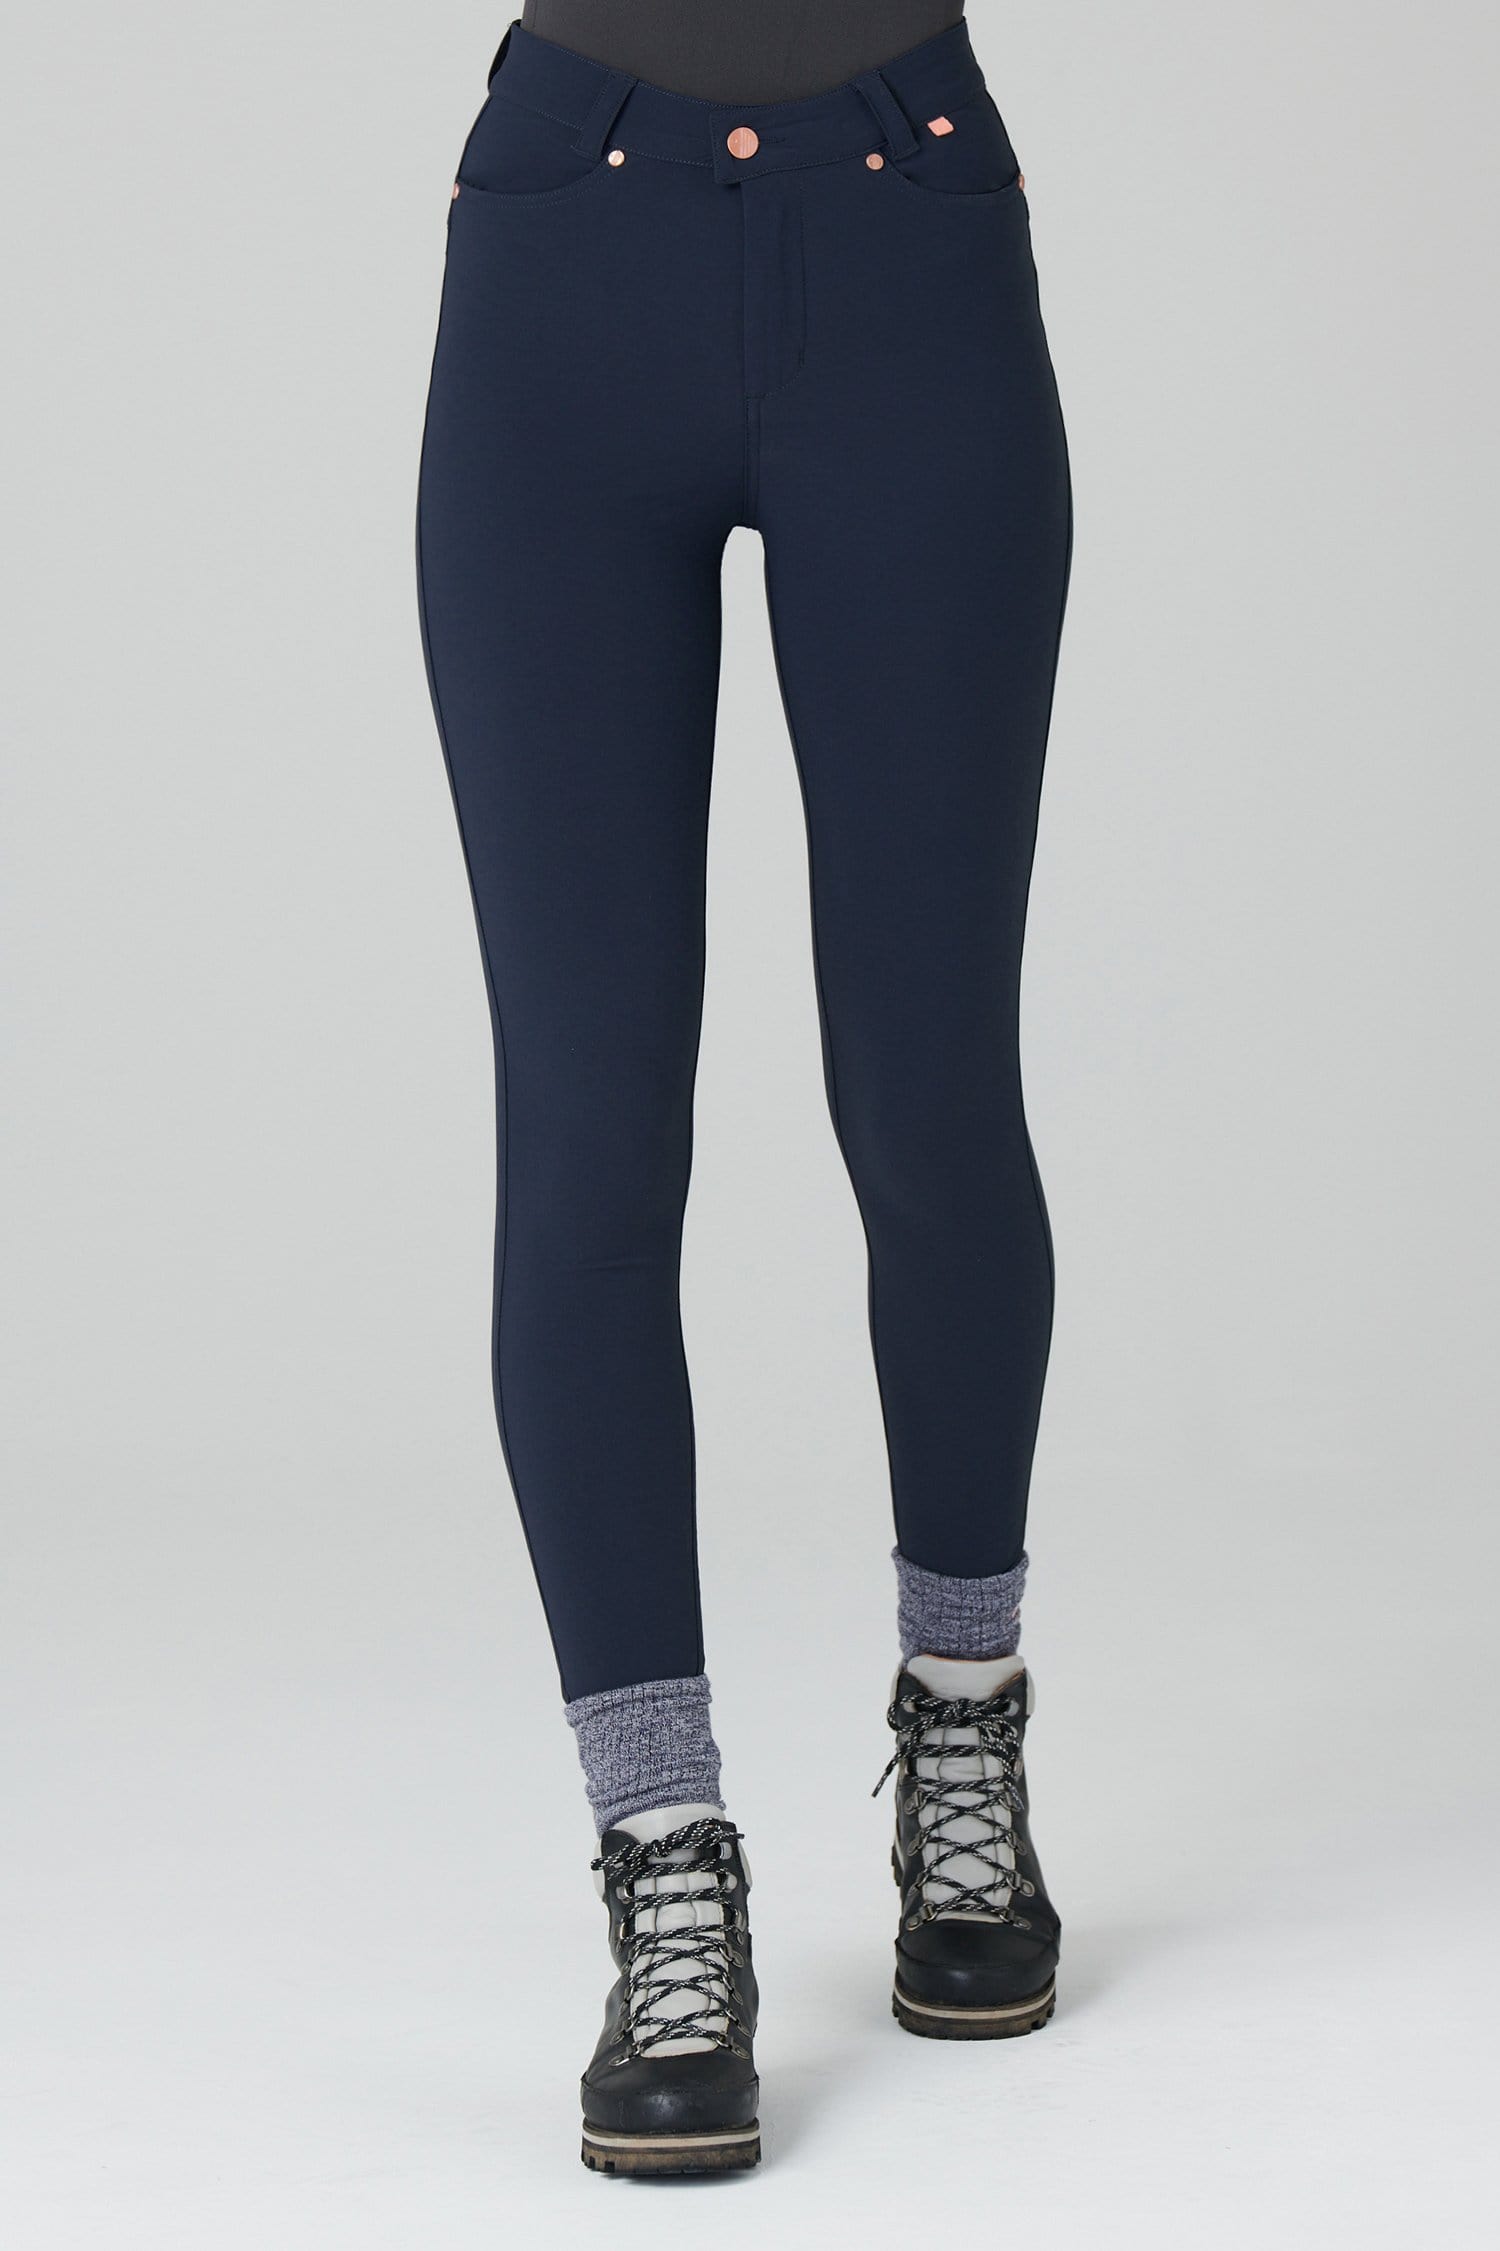 Thermal Skinny Outdoor Trousers - Deep Navy - 32xl / Uk14 - Womens - Acai Outdoorwear